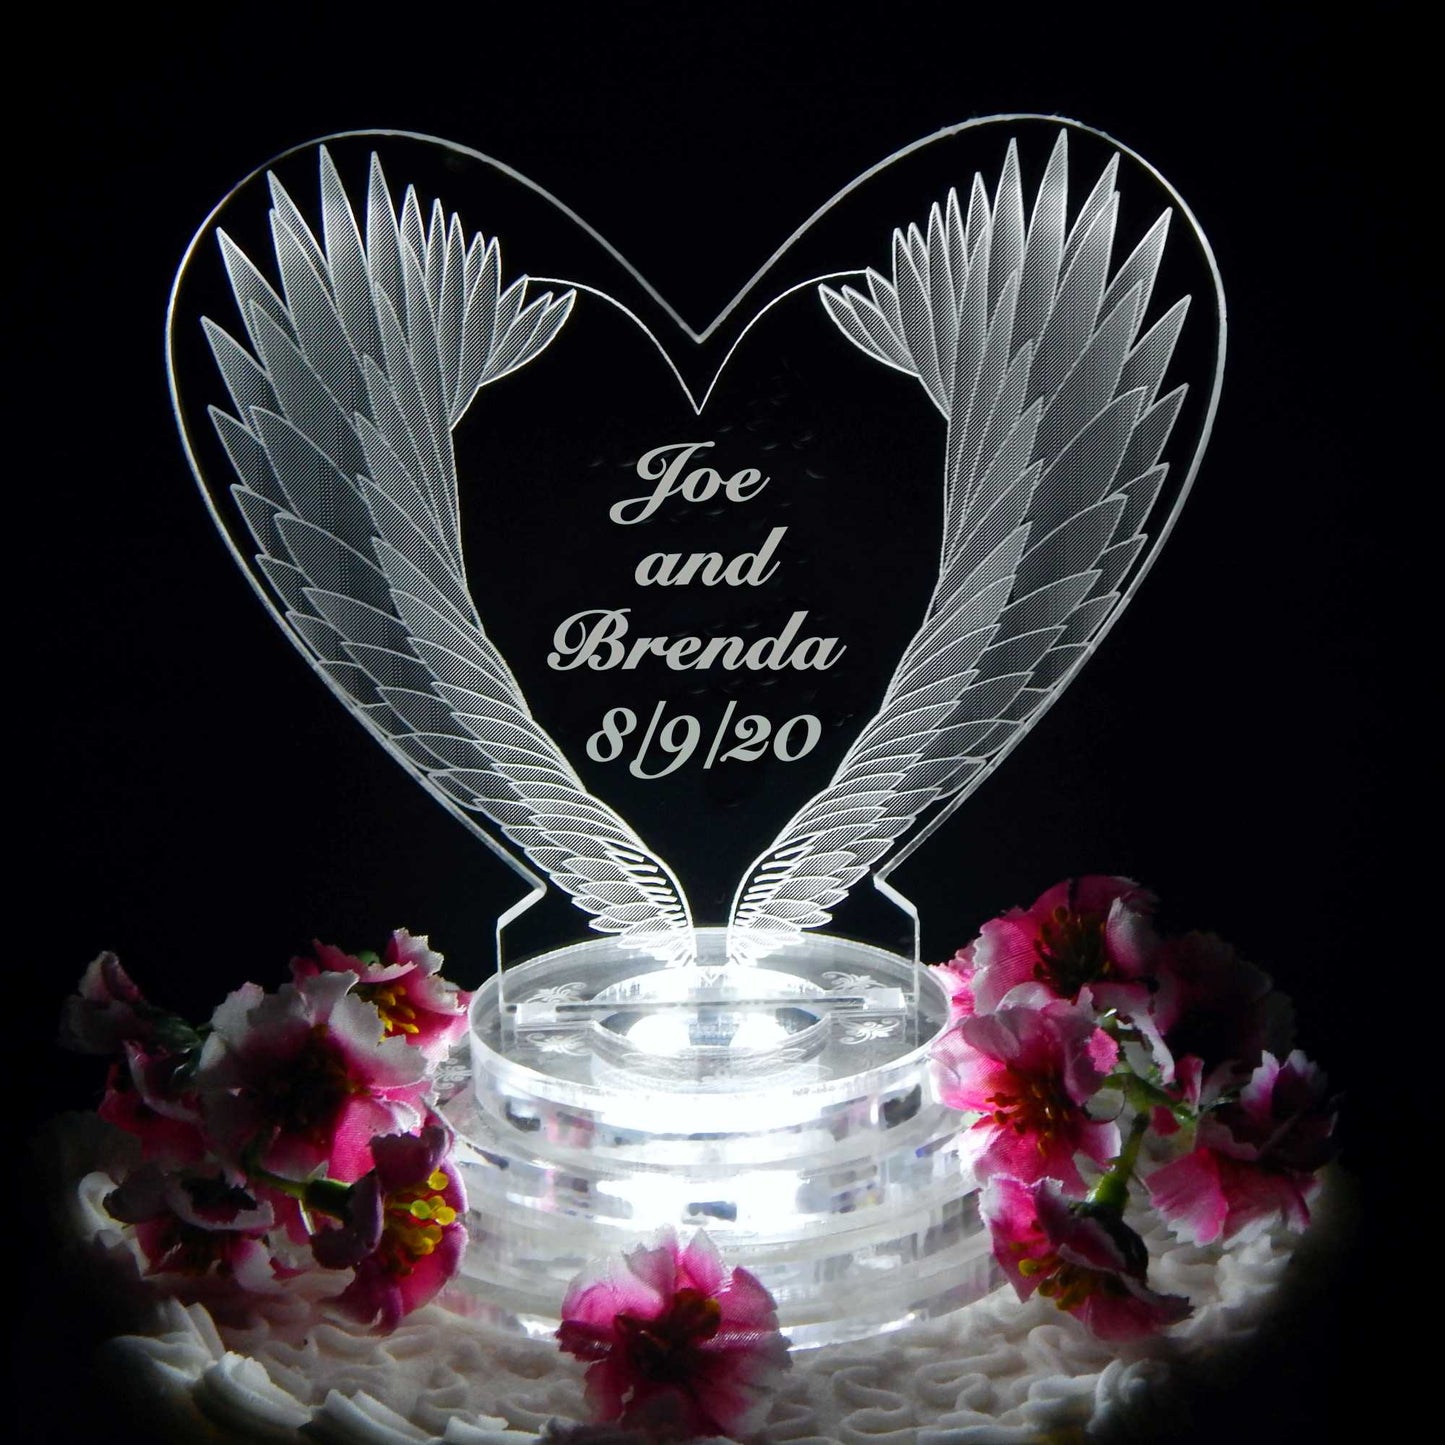 acrylic heart shaped cake topper designed with angel wings and engraved with names and date